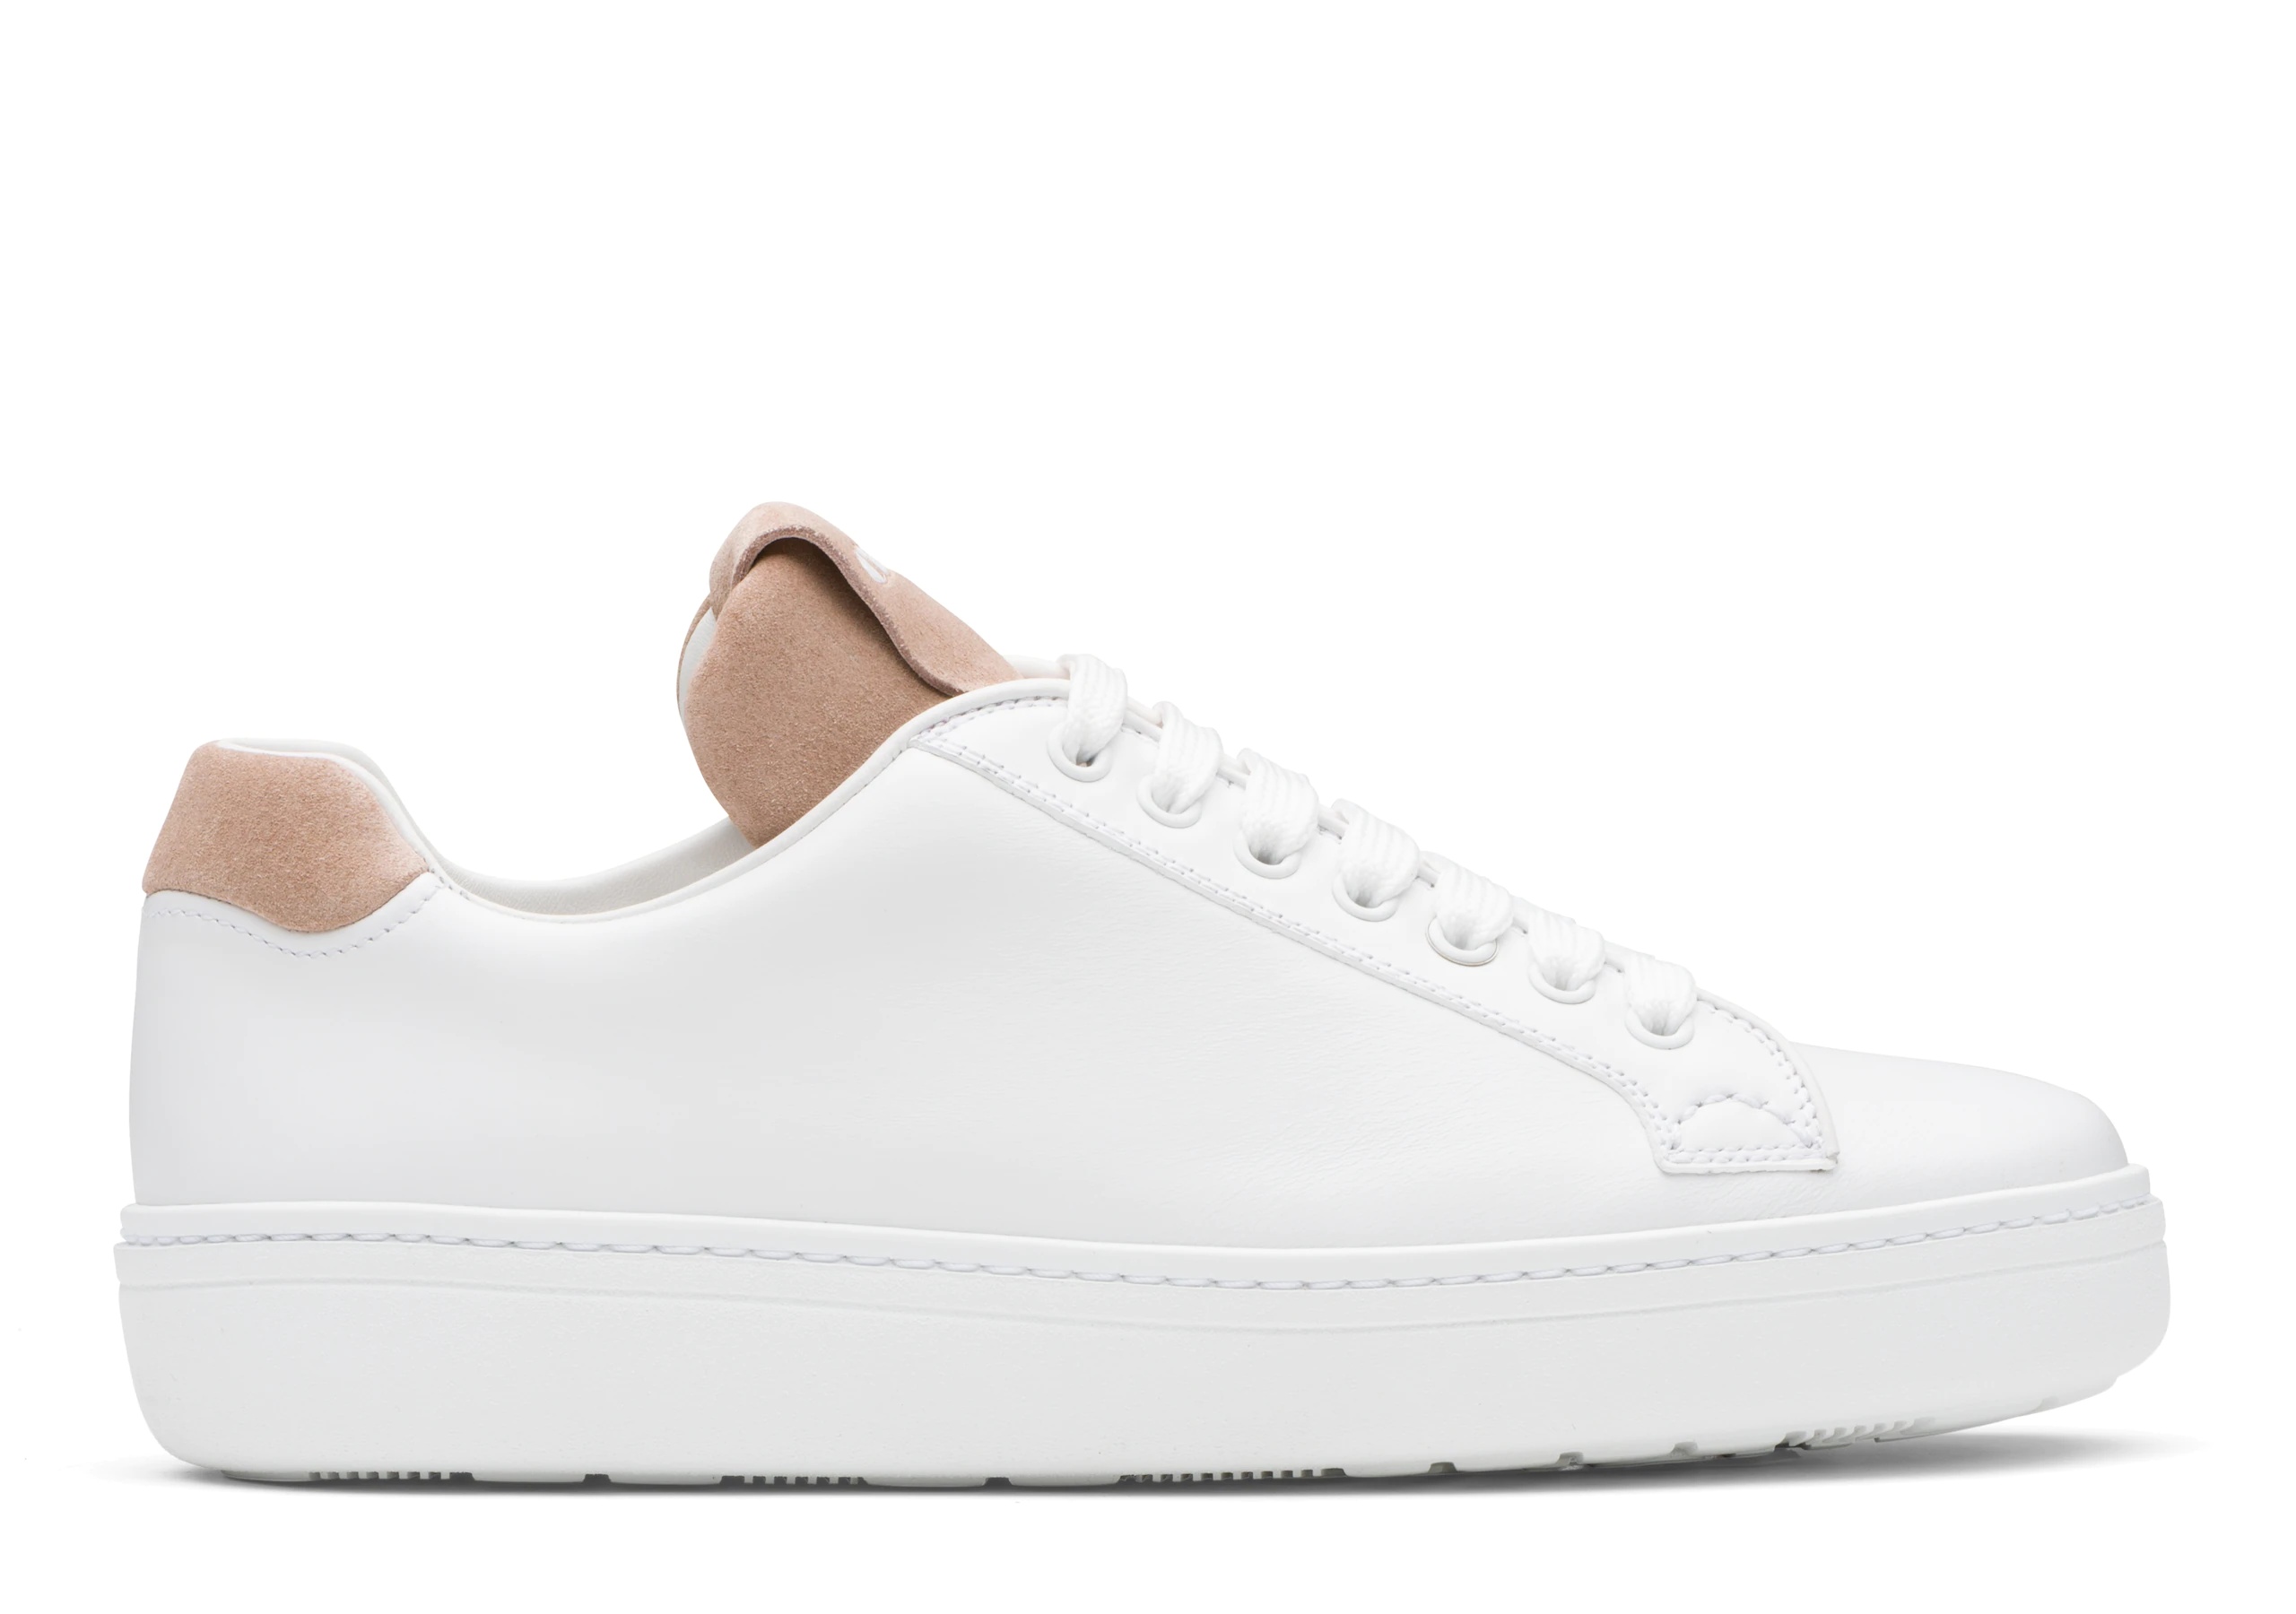 Boland
Calf Leather and Suede Classic Sneaker White/blush - 1